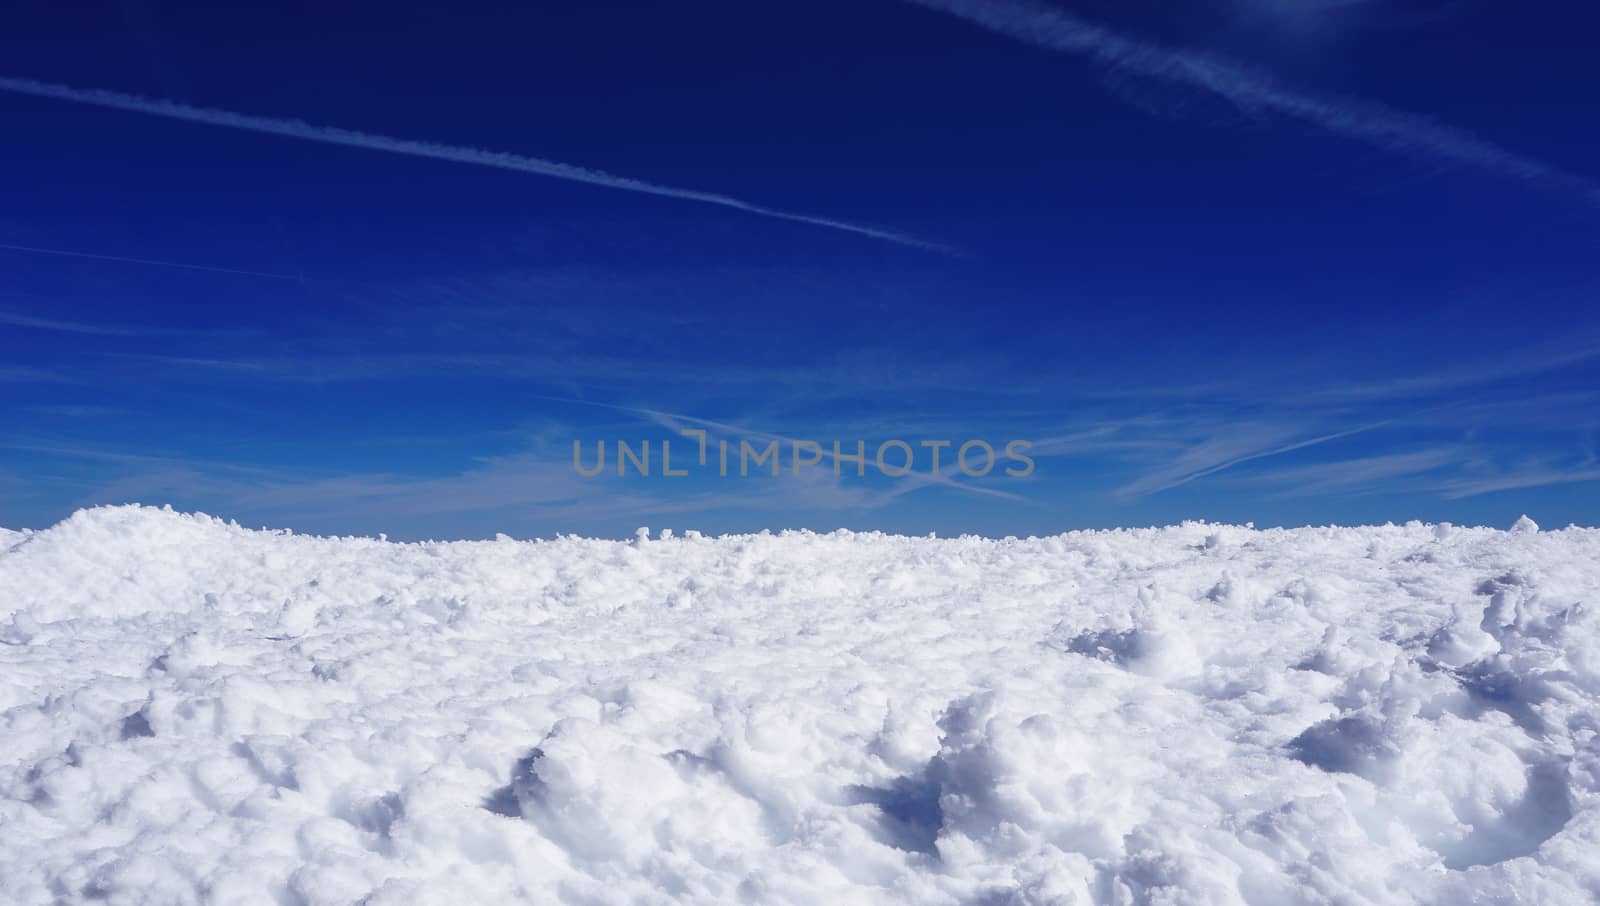 snow mountains field Titlis and blue sky background, Engelberg, Switzerland